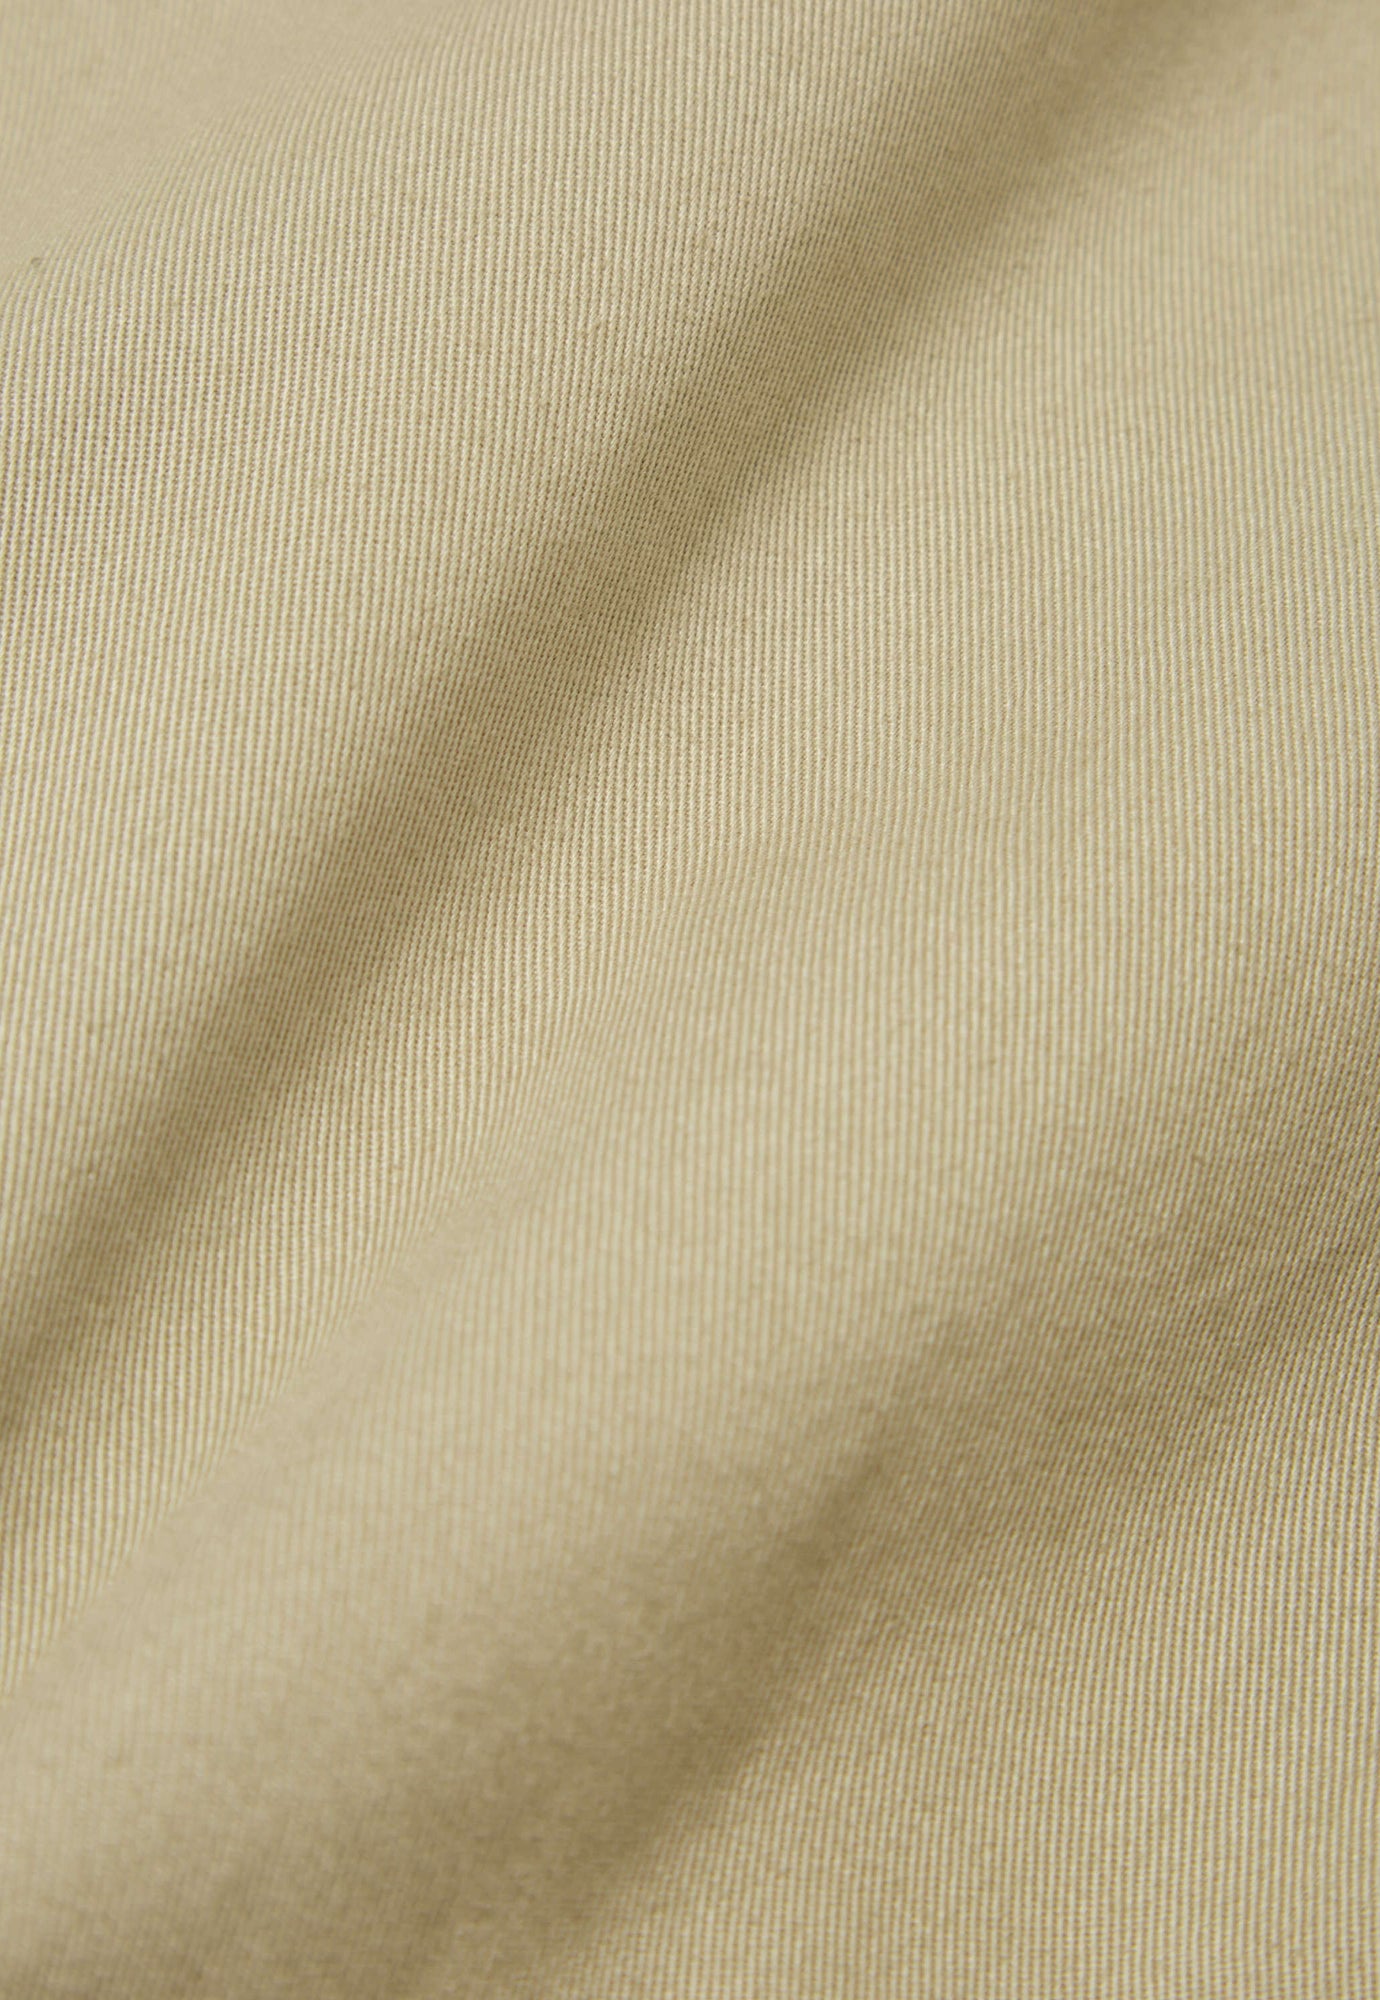 Universal Works Pleated Track Short in Stone Twill